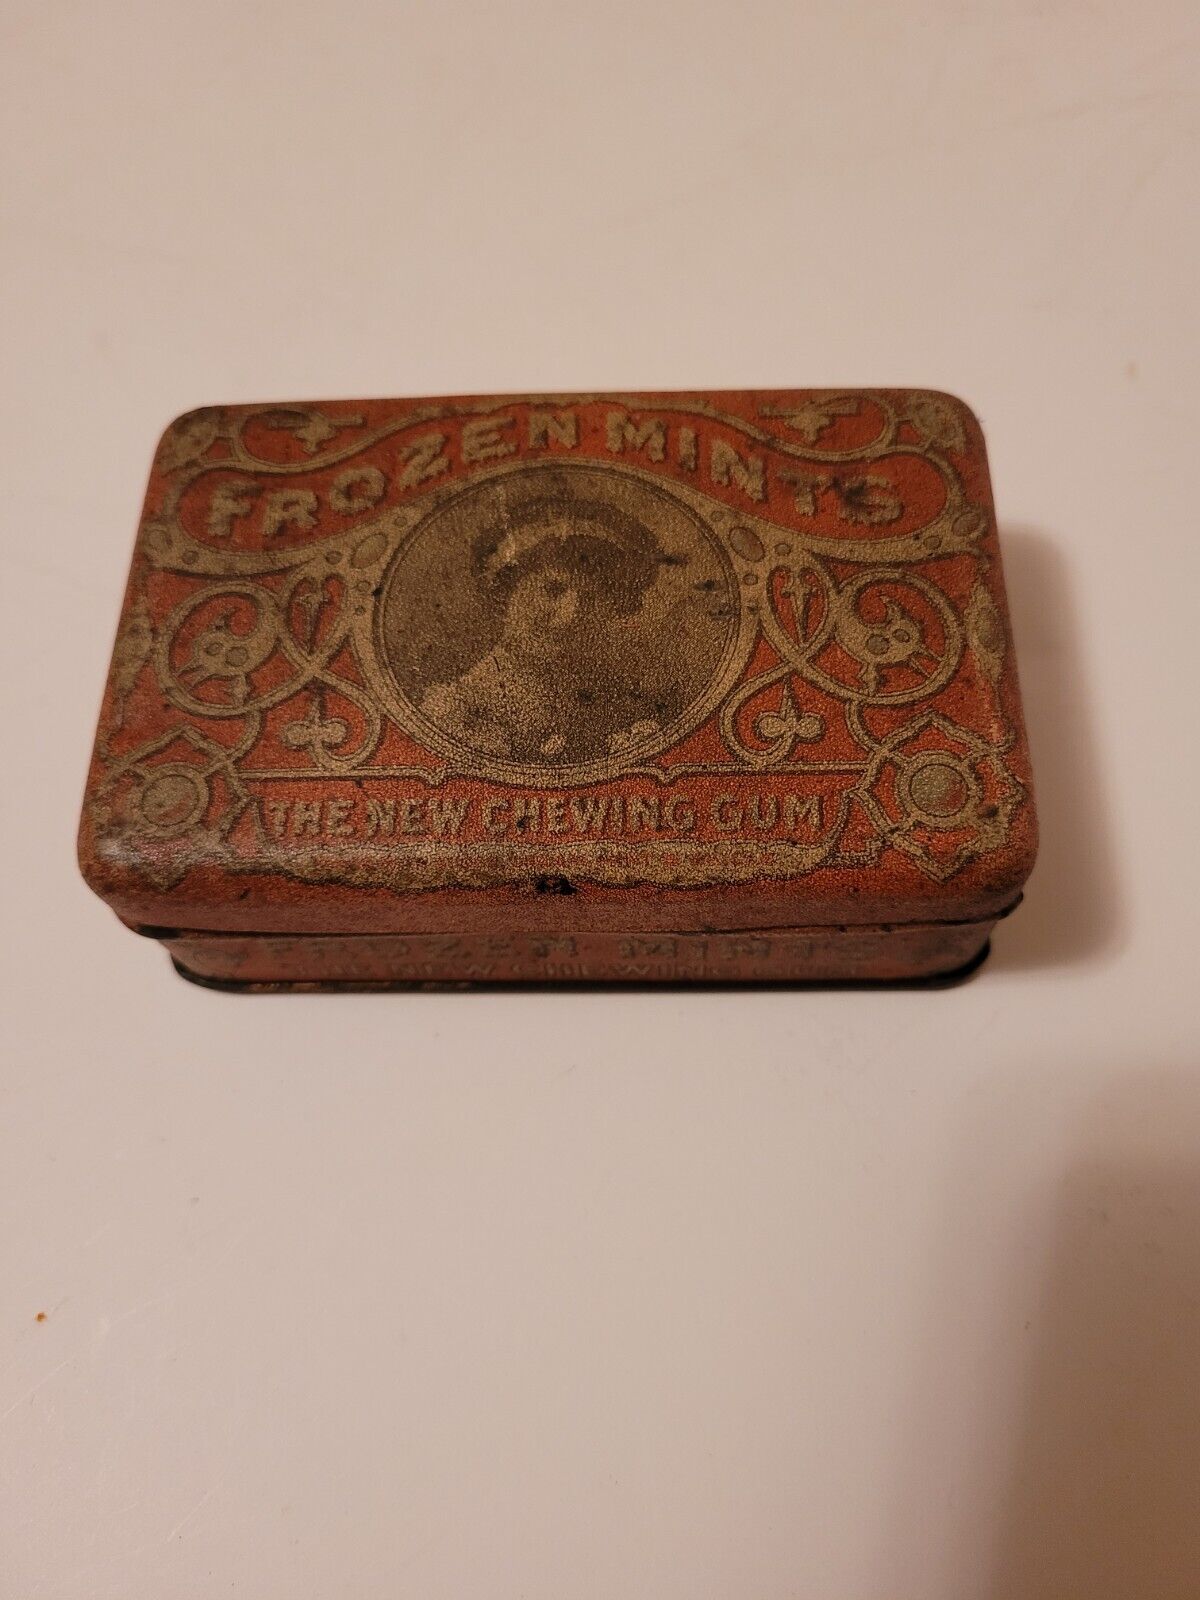 Rare Eary Frozen Mint The New Chewing Gum Tin! Great Lithograph!